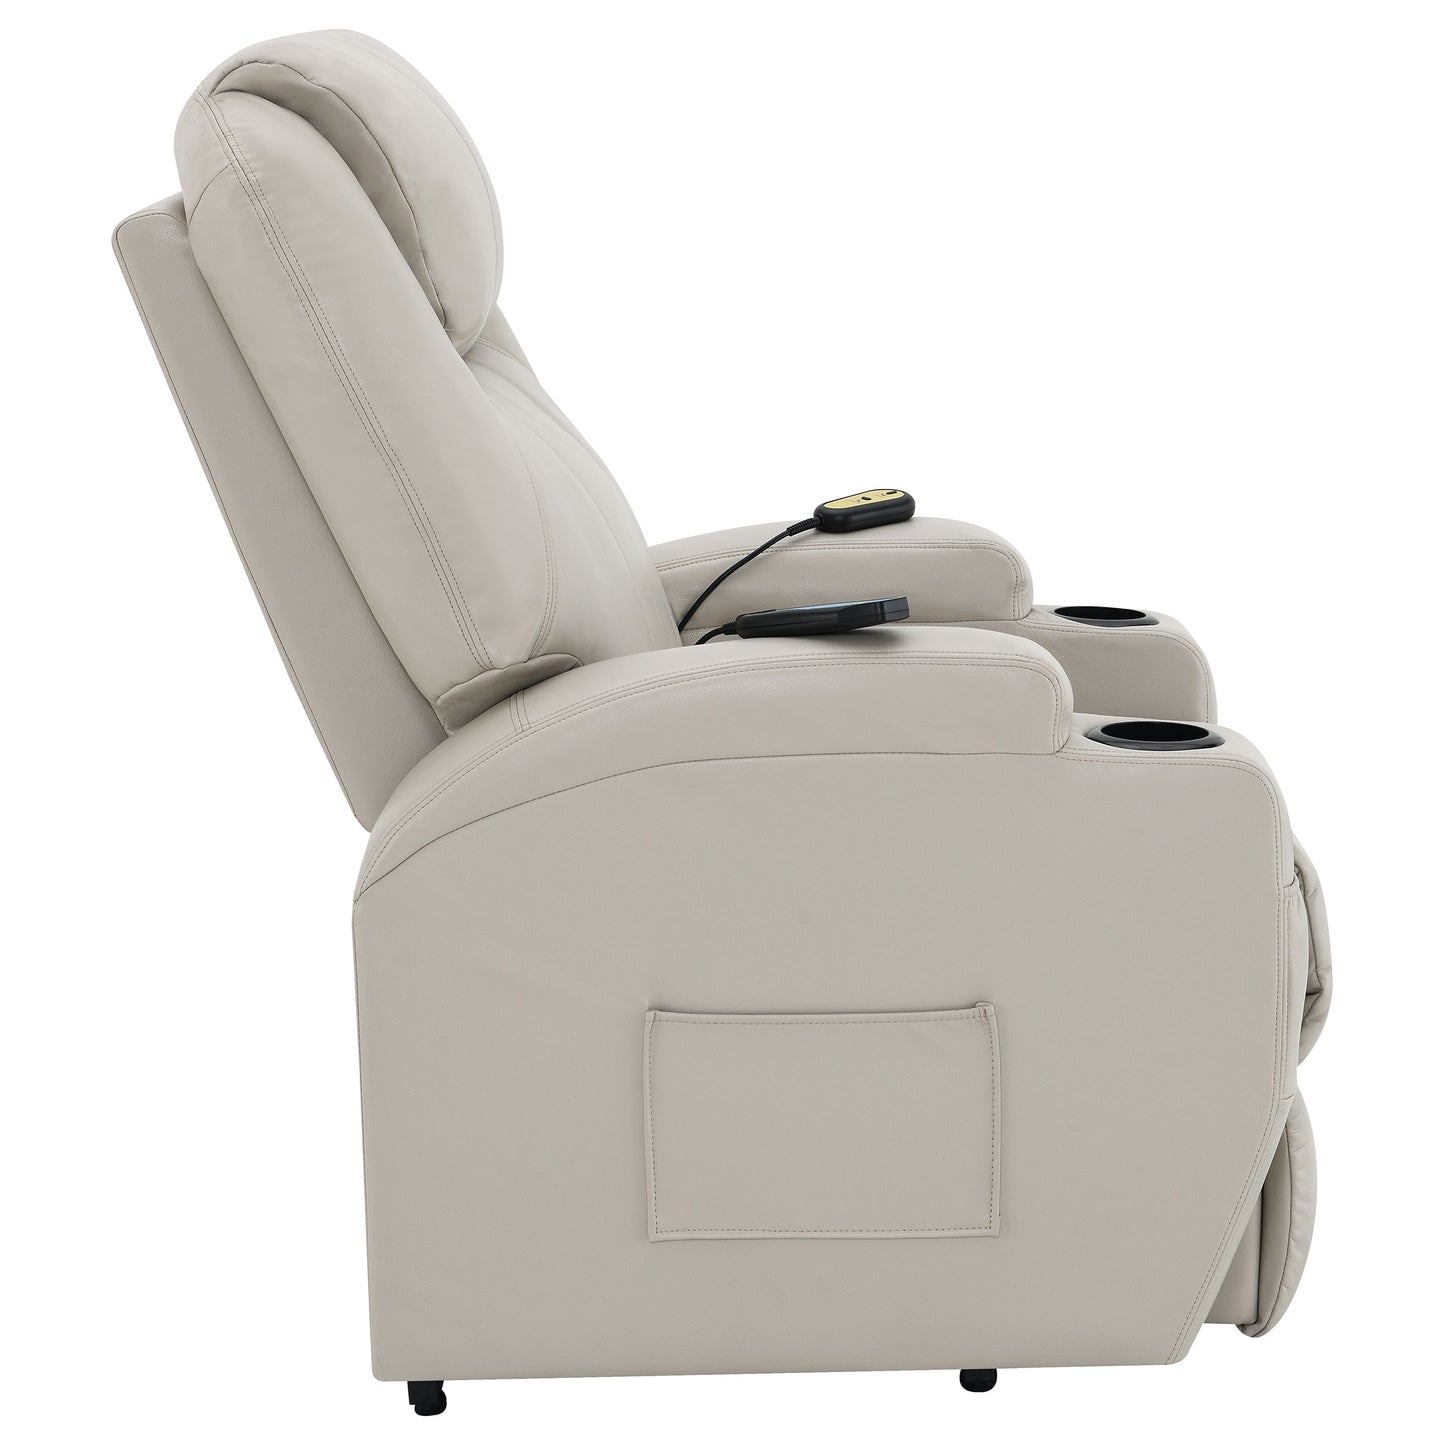 Sanger Upholstered Power Lift Recliner Chair with Massage Champagne